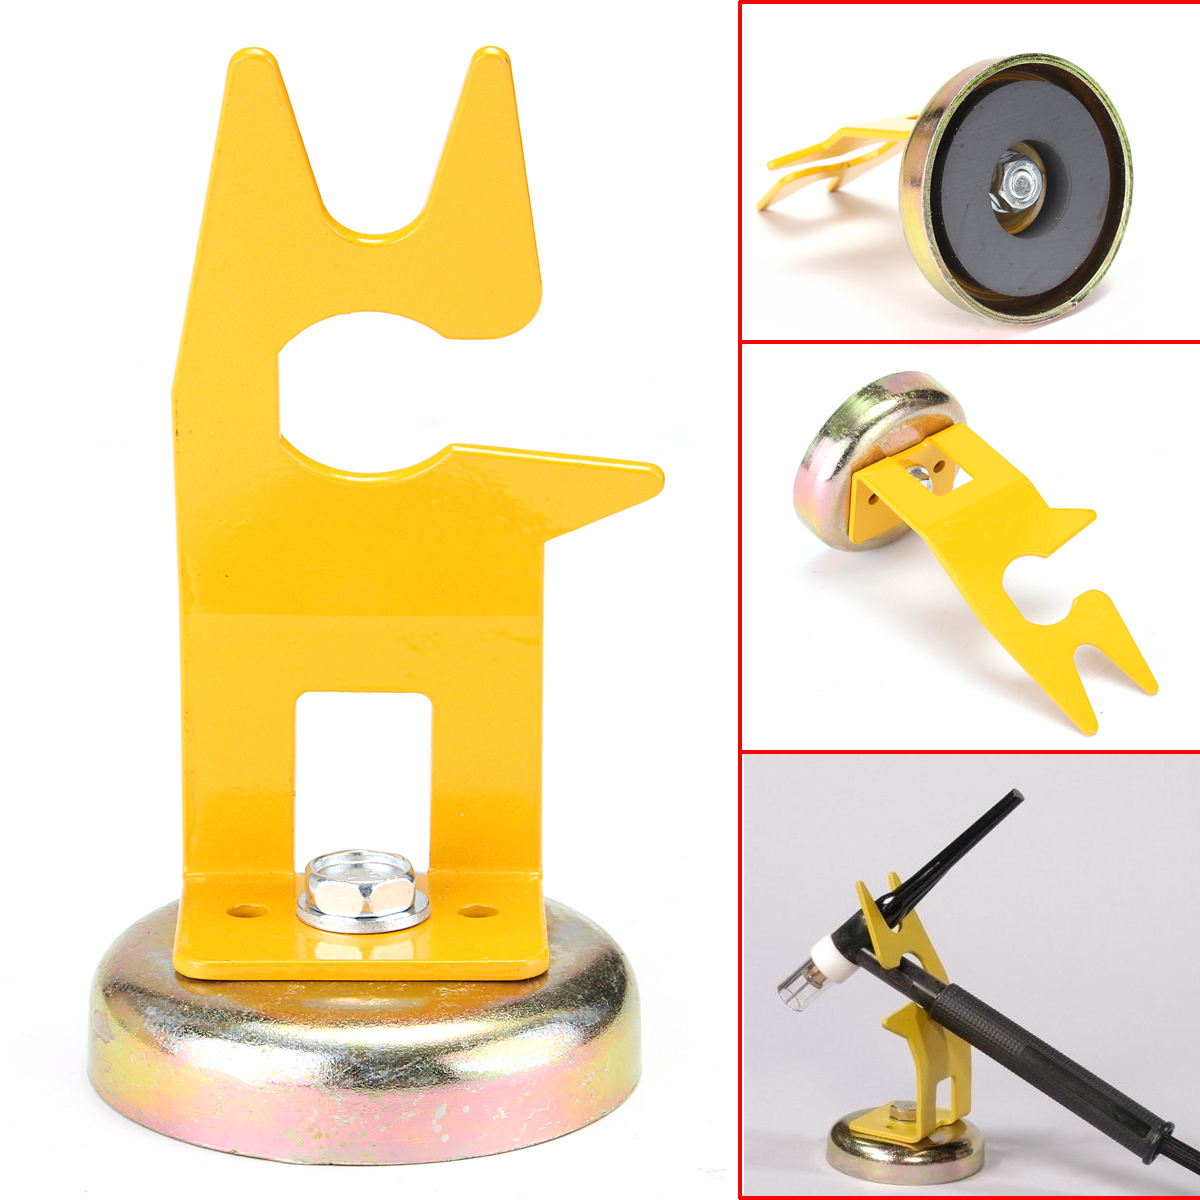 TIG-Welding-Torch-Magnetic-Stand-Holder-Support-For-Holding-Hot-TIG-Torches-Cup-1335394